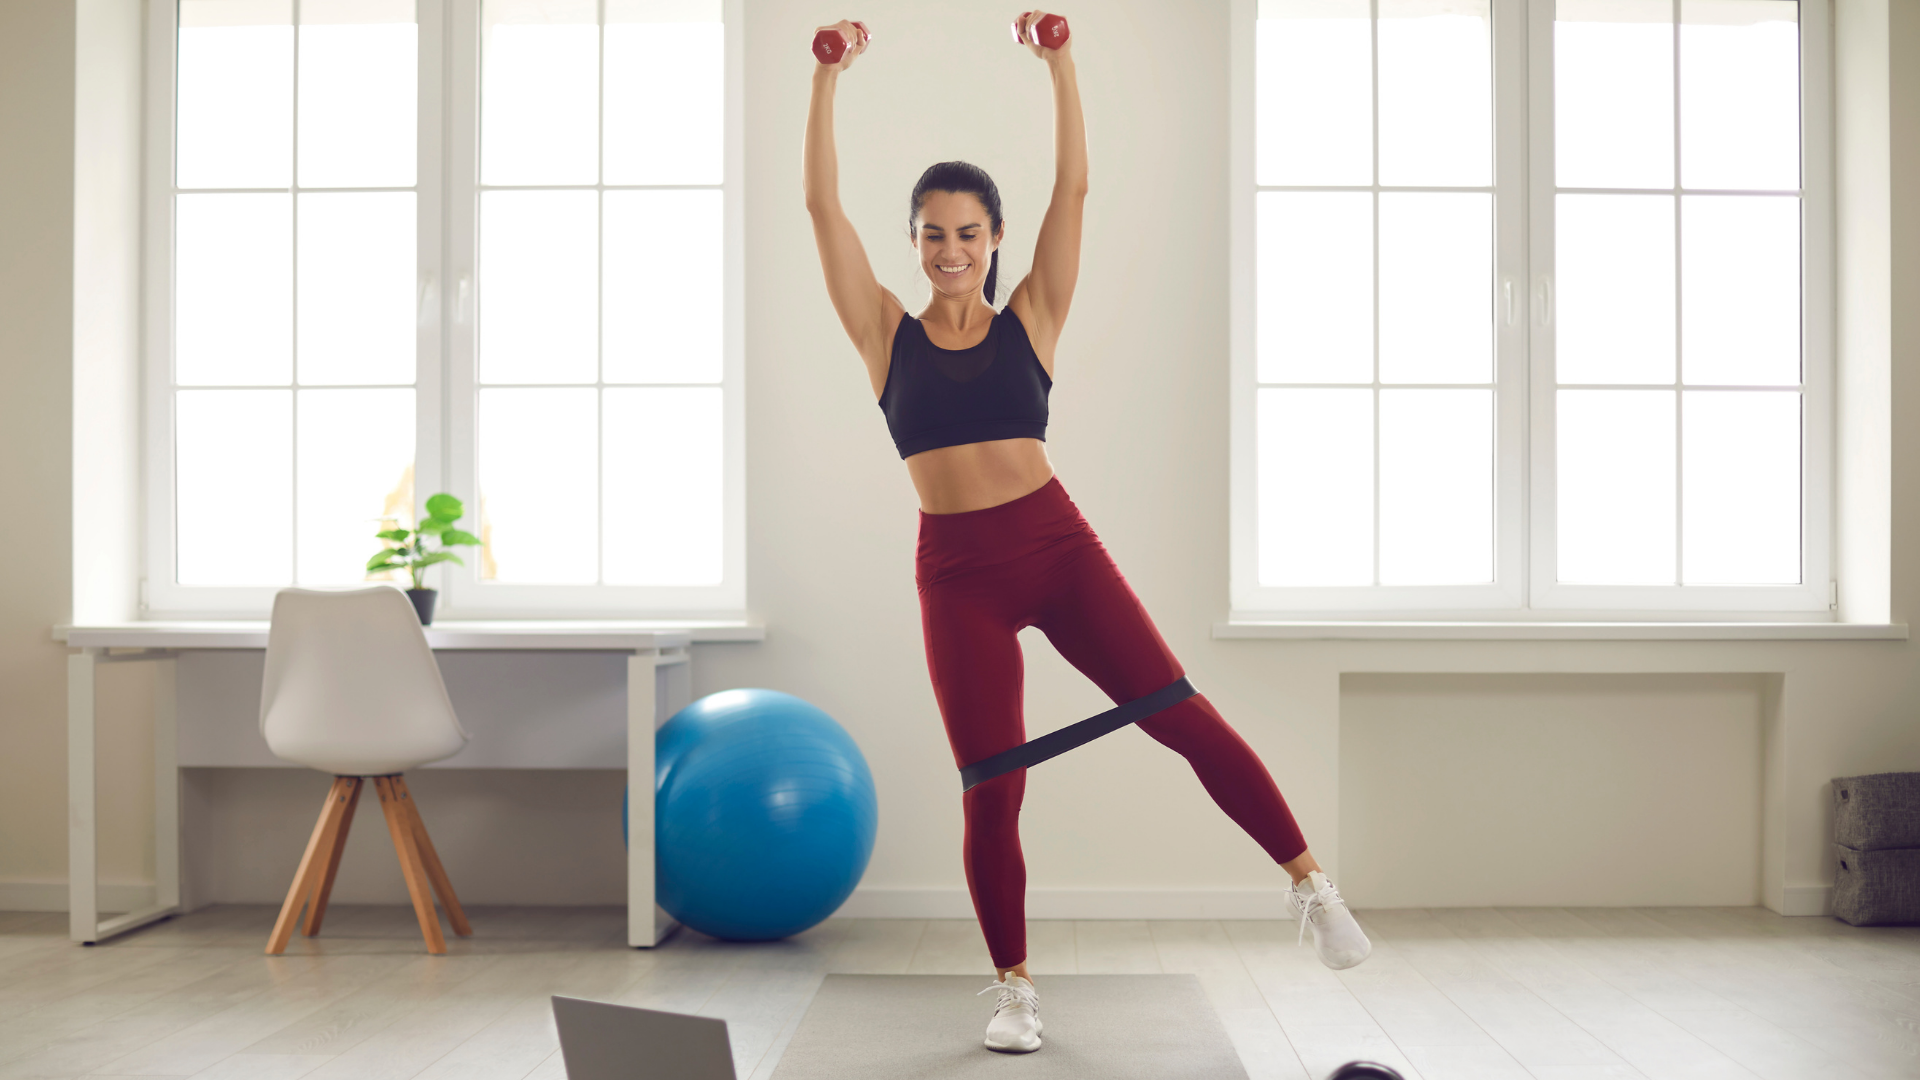 Woman training at home with fitness equipment